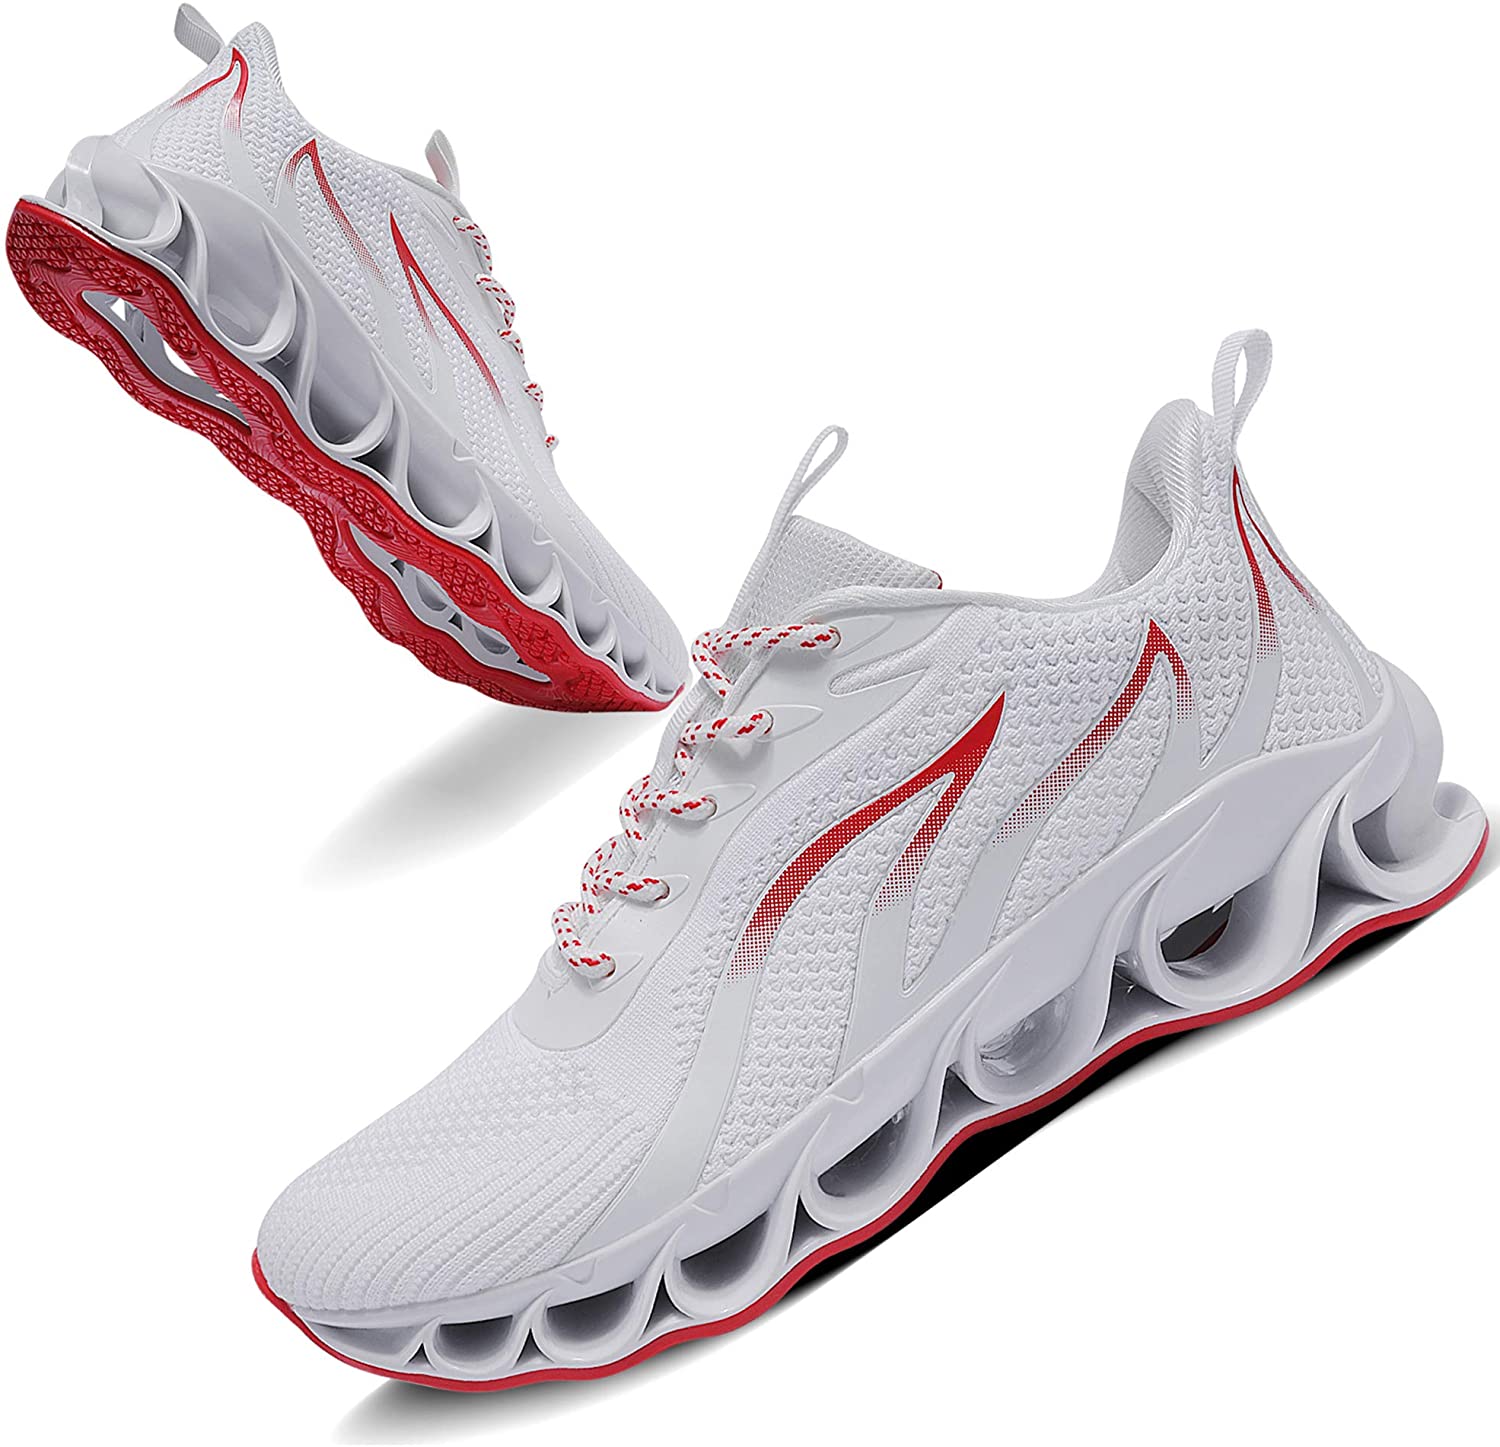 WENSY Mens Fashion Breathable Non-Slip Sports Competitive Walking Running Shoes Sports Shoes Lightweight Walking Shoes 